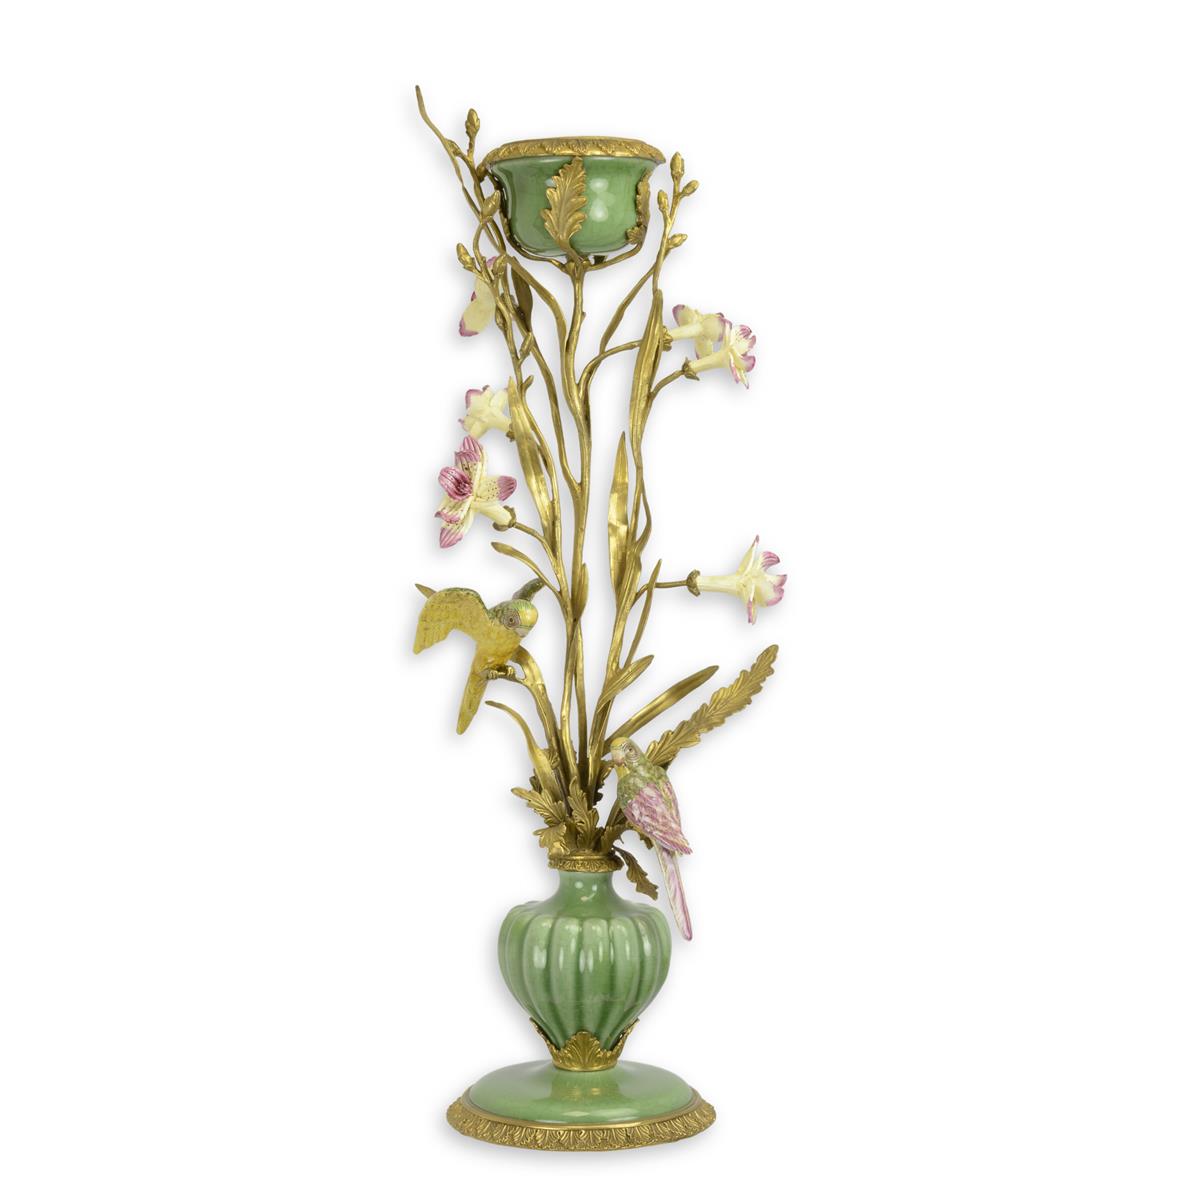 A BRONZE MOUNTED PORCELAIN CANDLE HOLDER